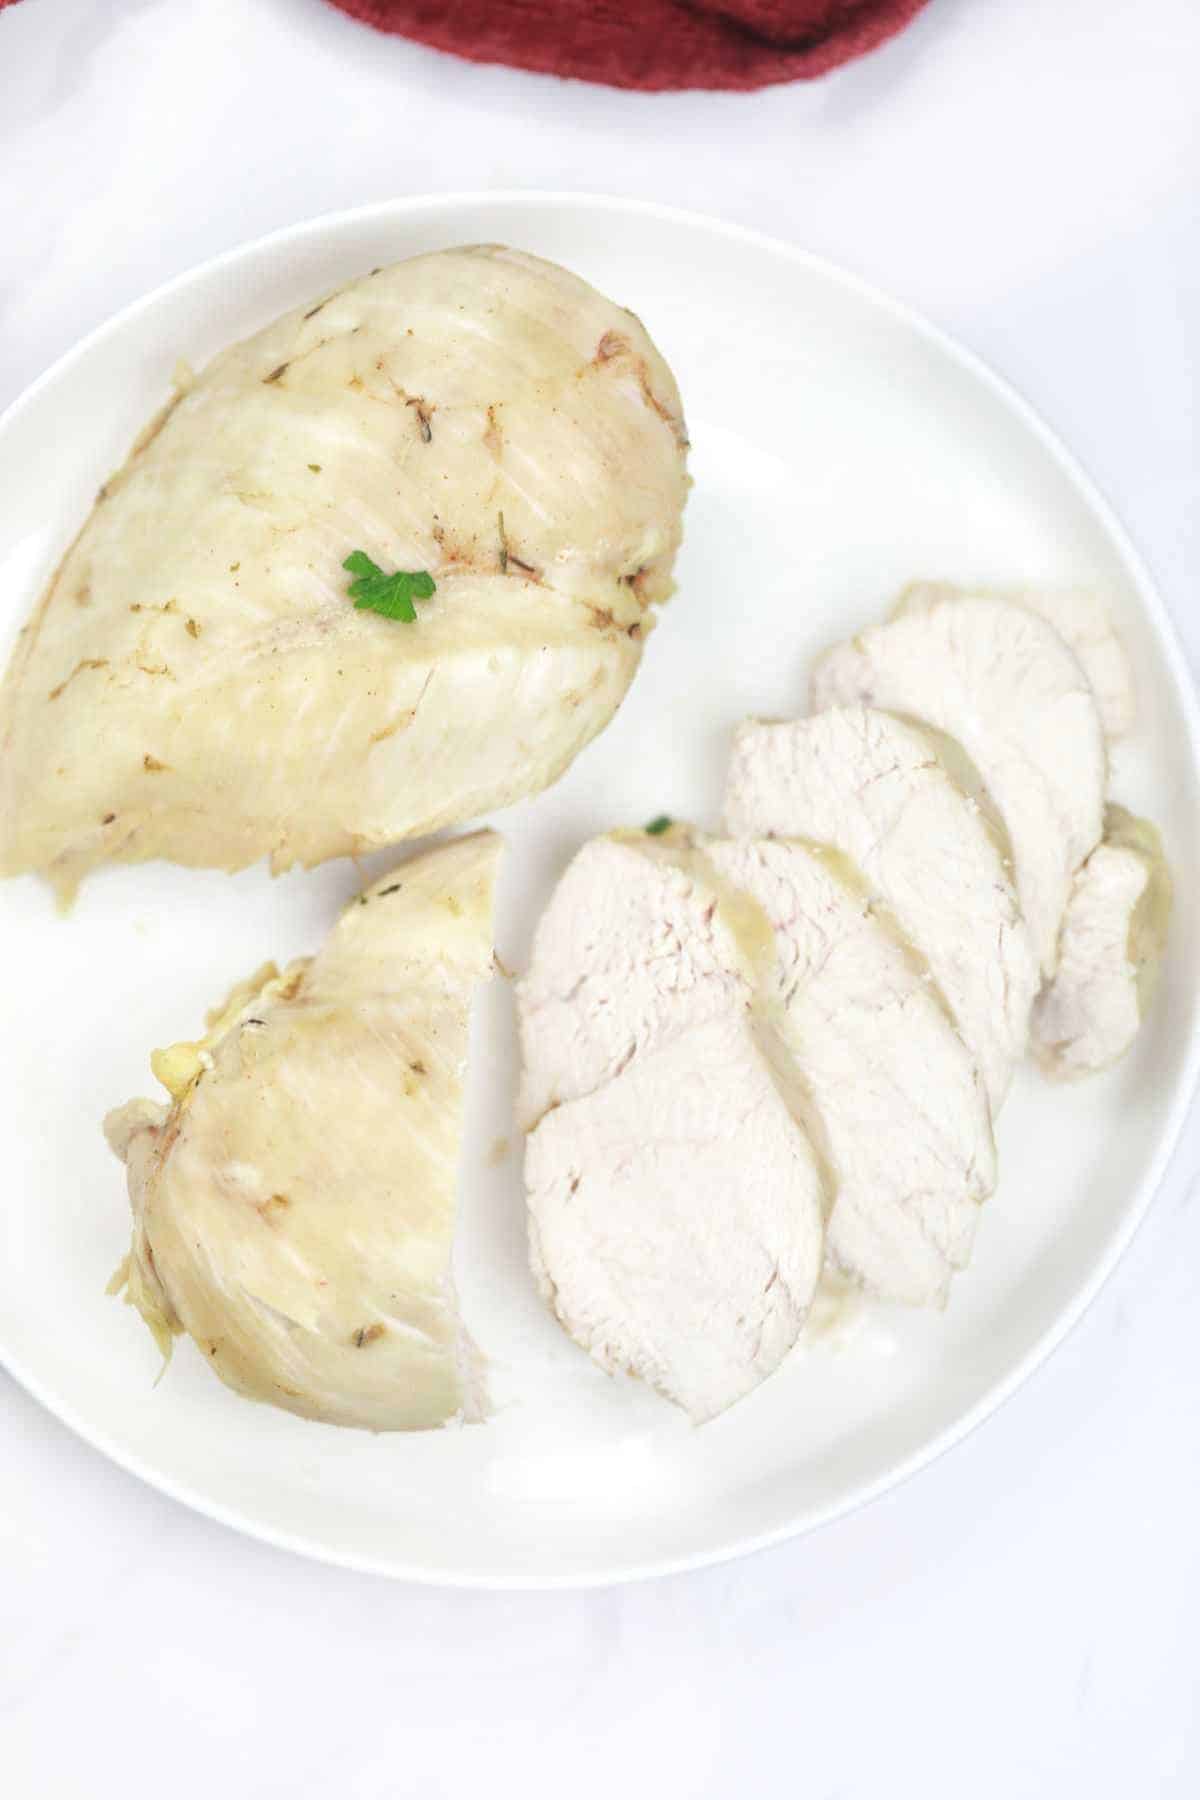 2 boiled chicken breast pieces on a plate with one sliced into smaller pieces.